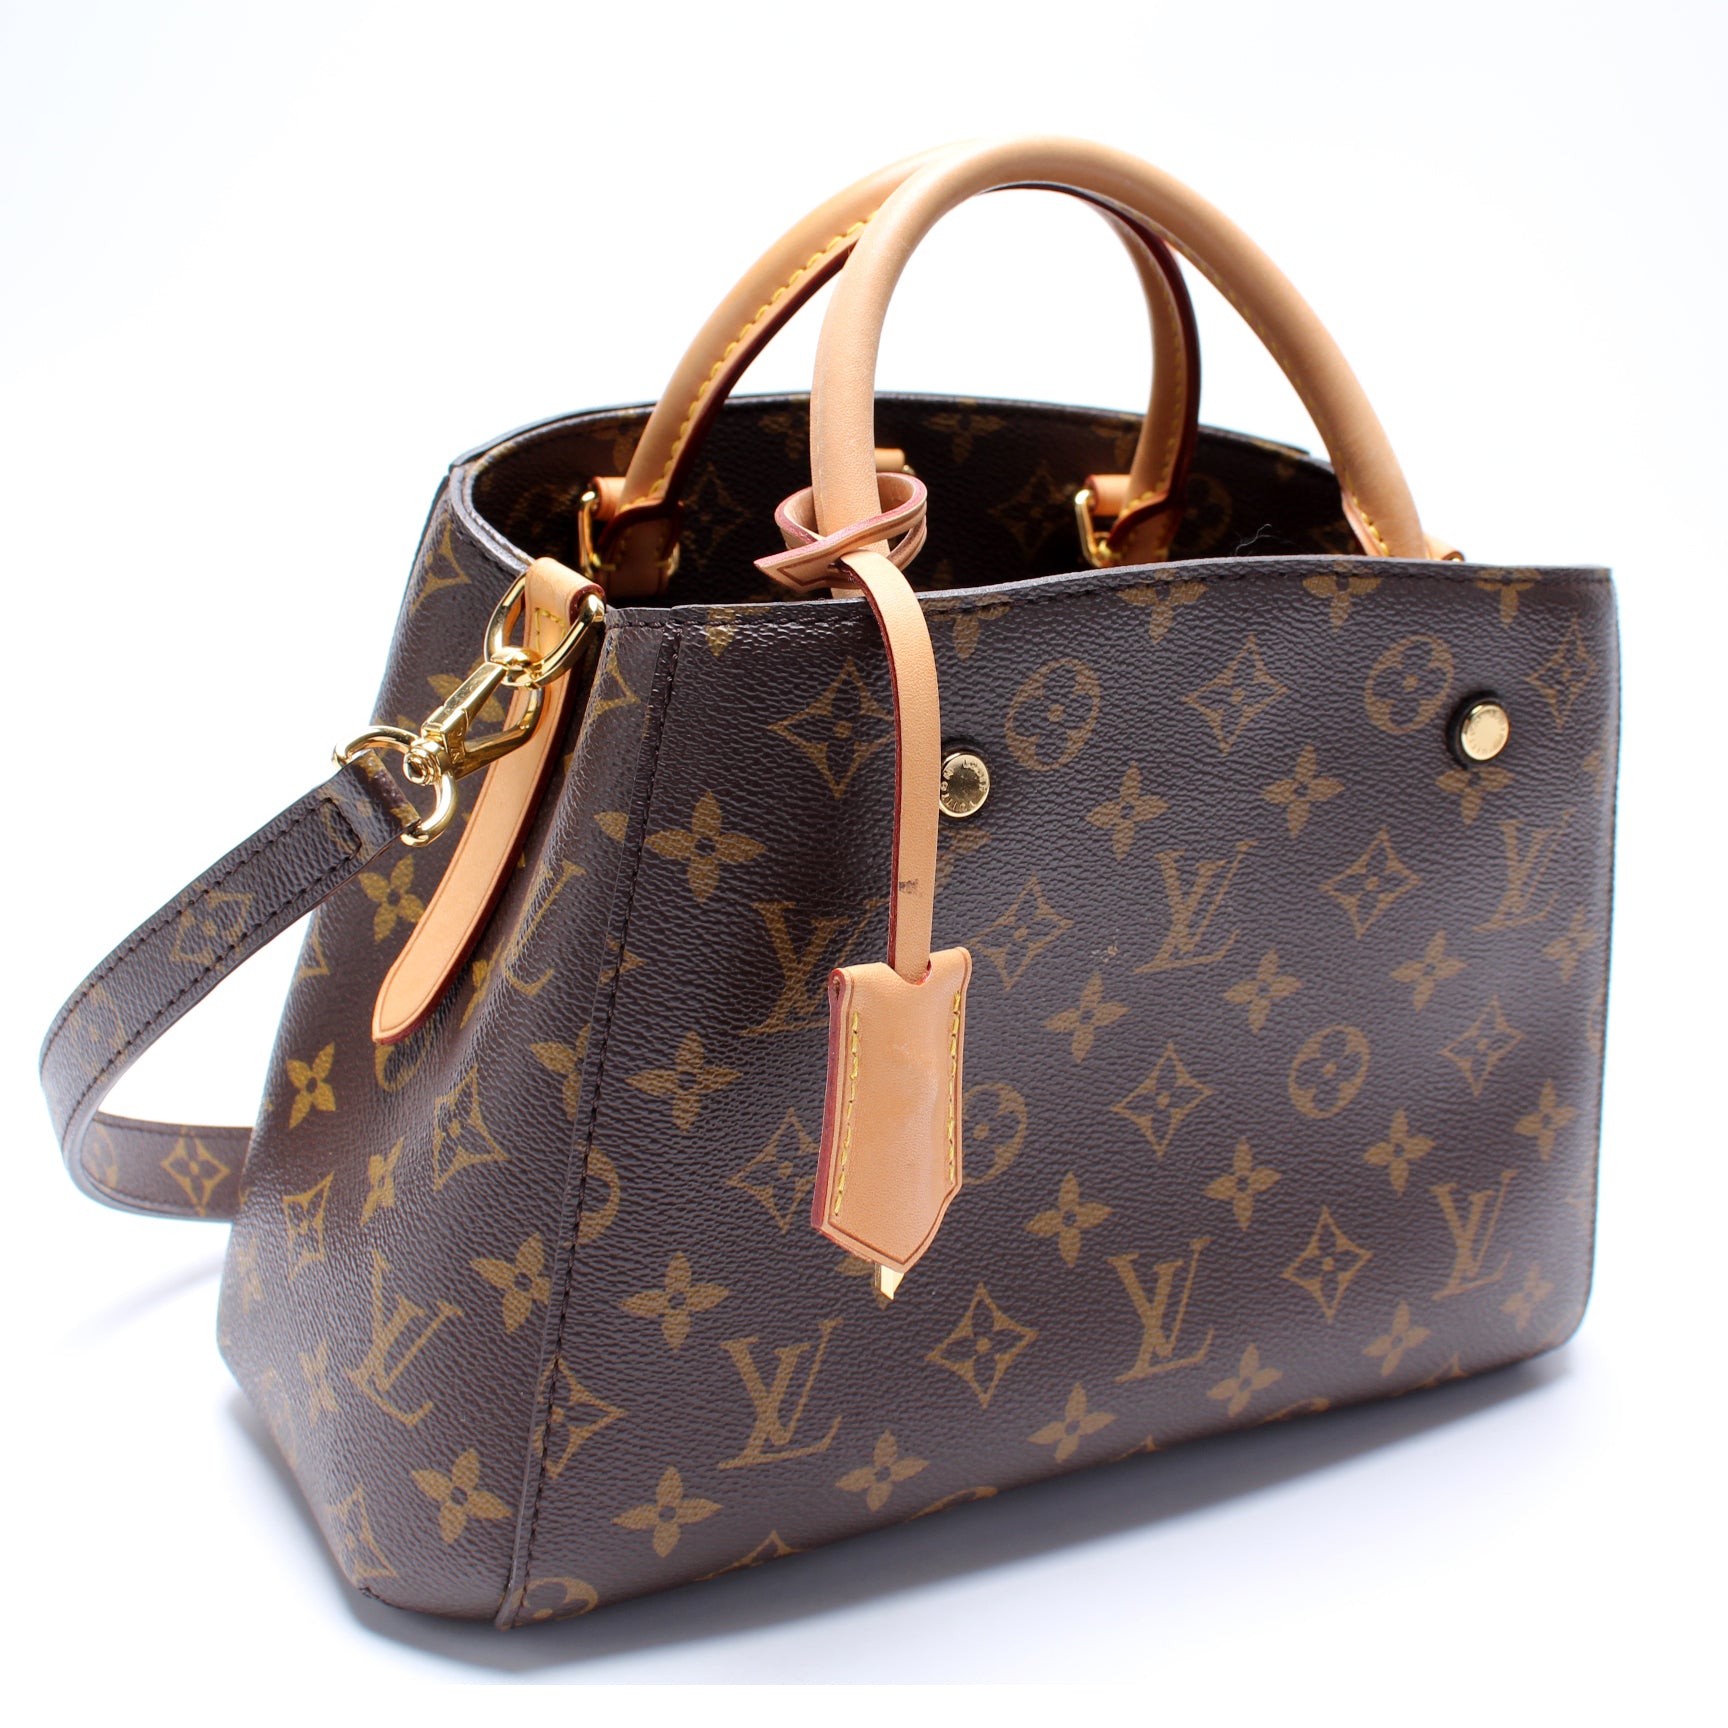 UPDATED* REVIEW OF THE LOUIS VUITTON MONTAIGNE BB IN MONOGRAM CANVAS